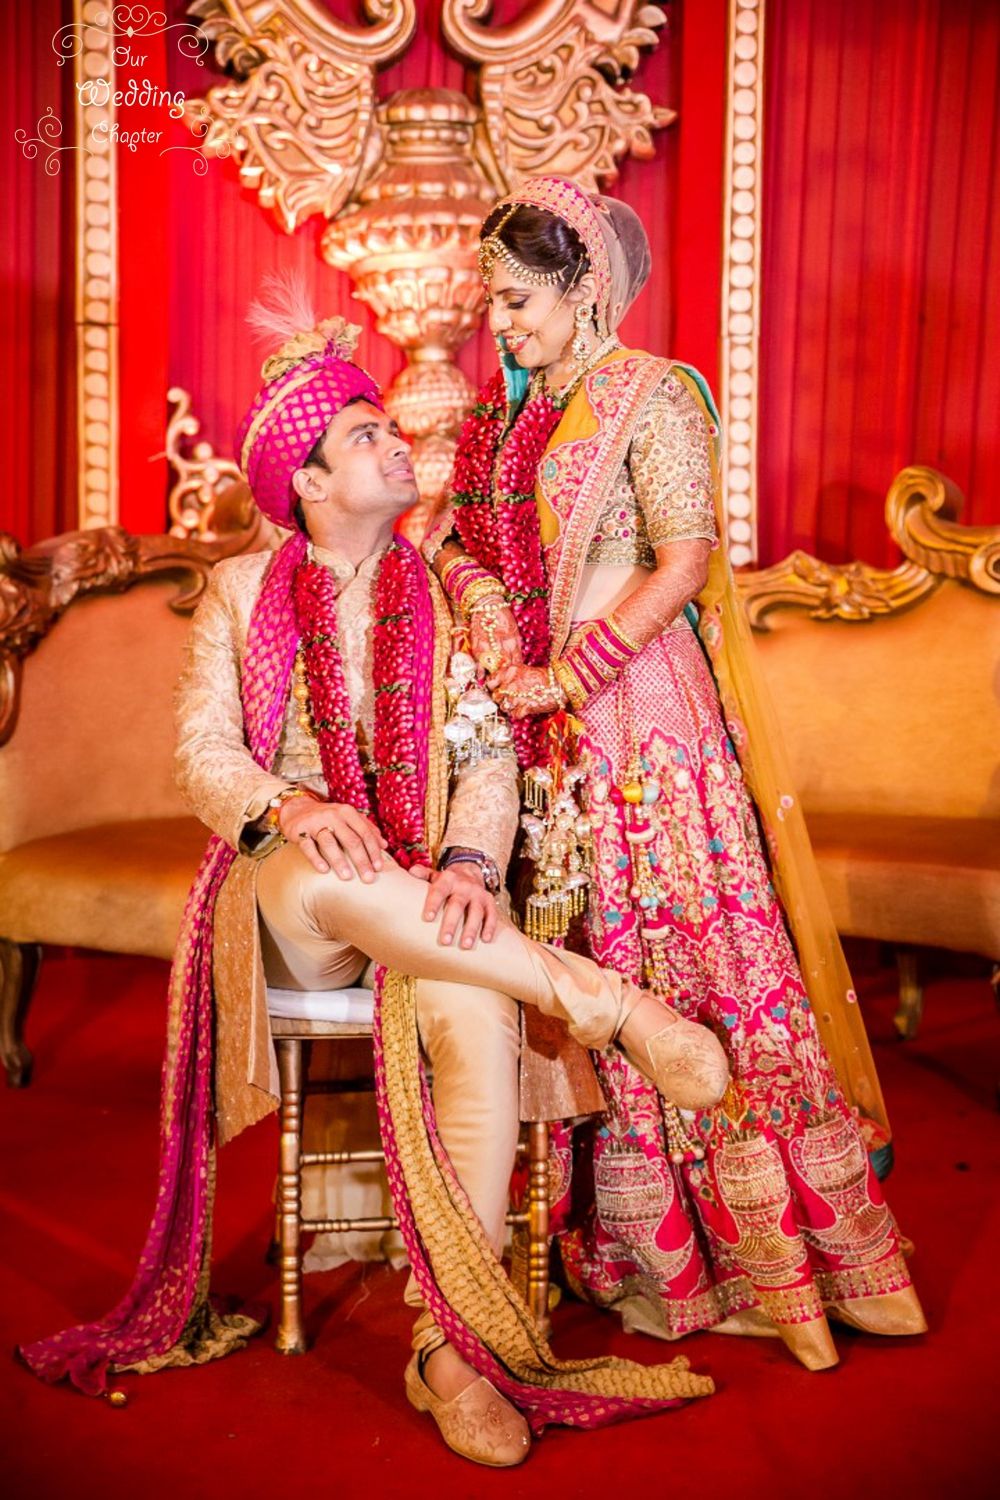 Photo From Aditya and Vasudha - By Our Wedding Chapter